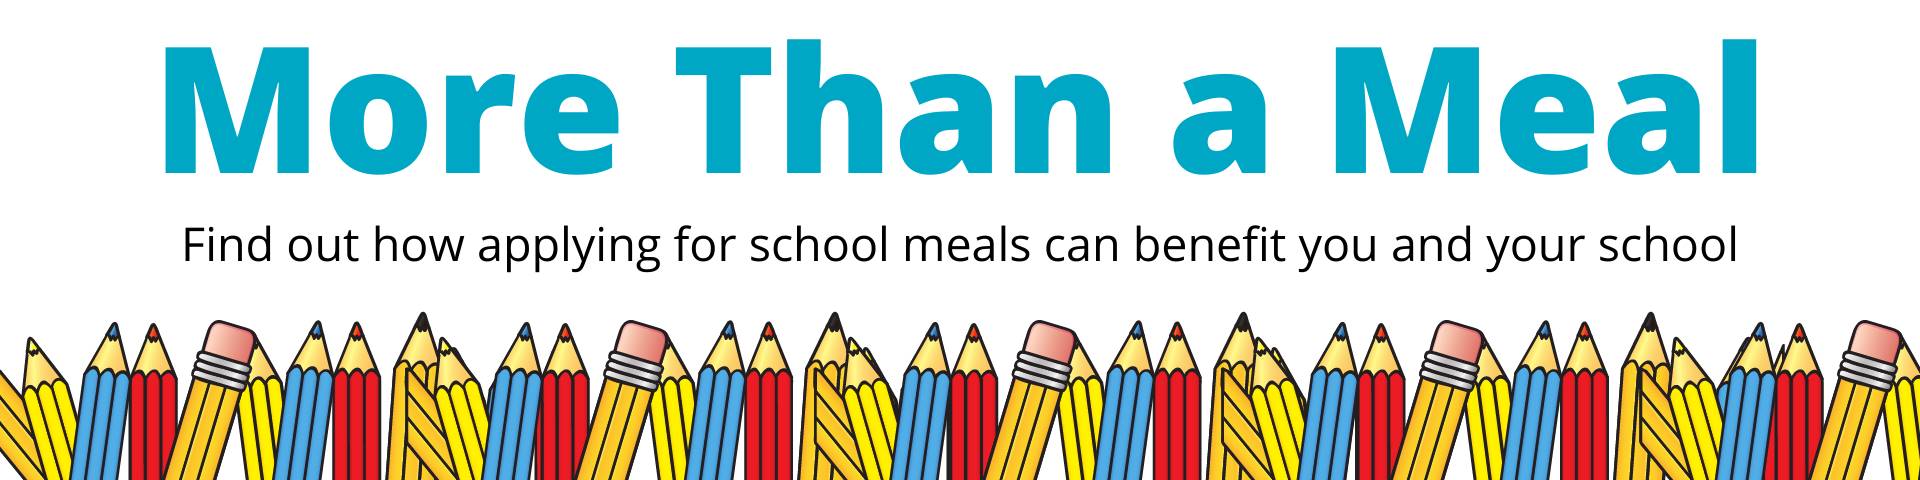 More than a Meal: Find out how applying for school meals can benefit you and your school